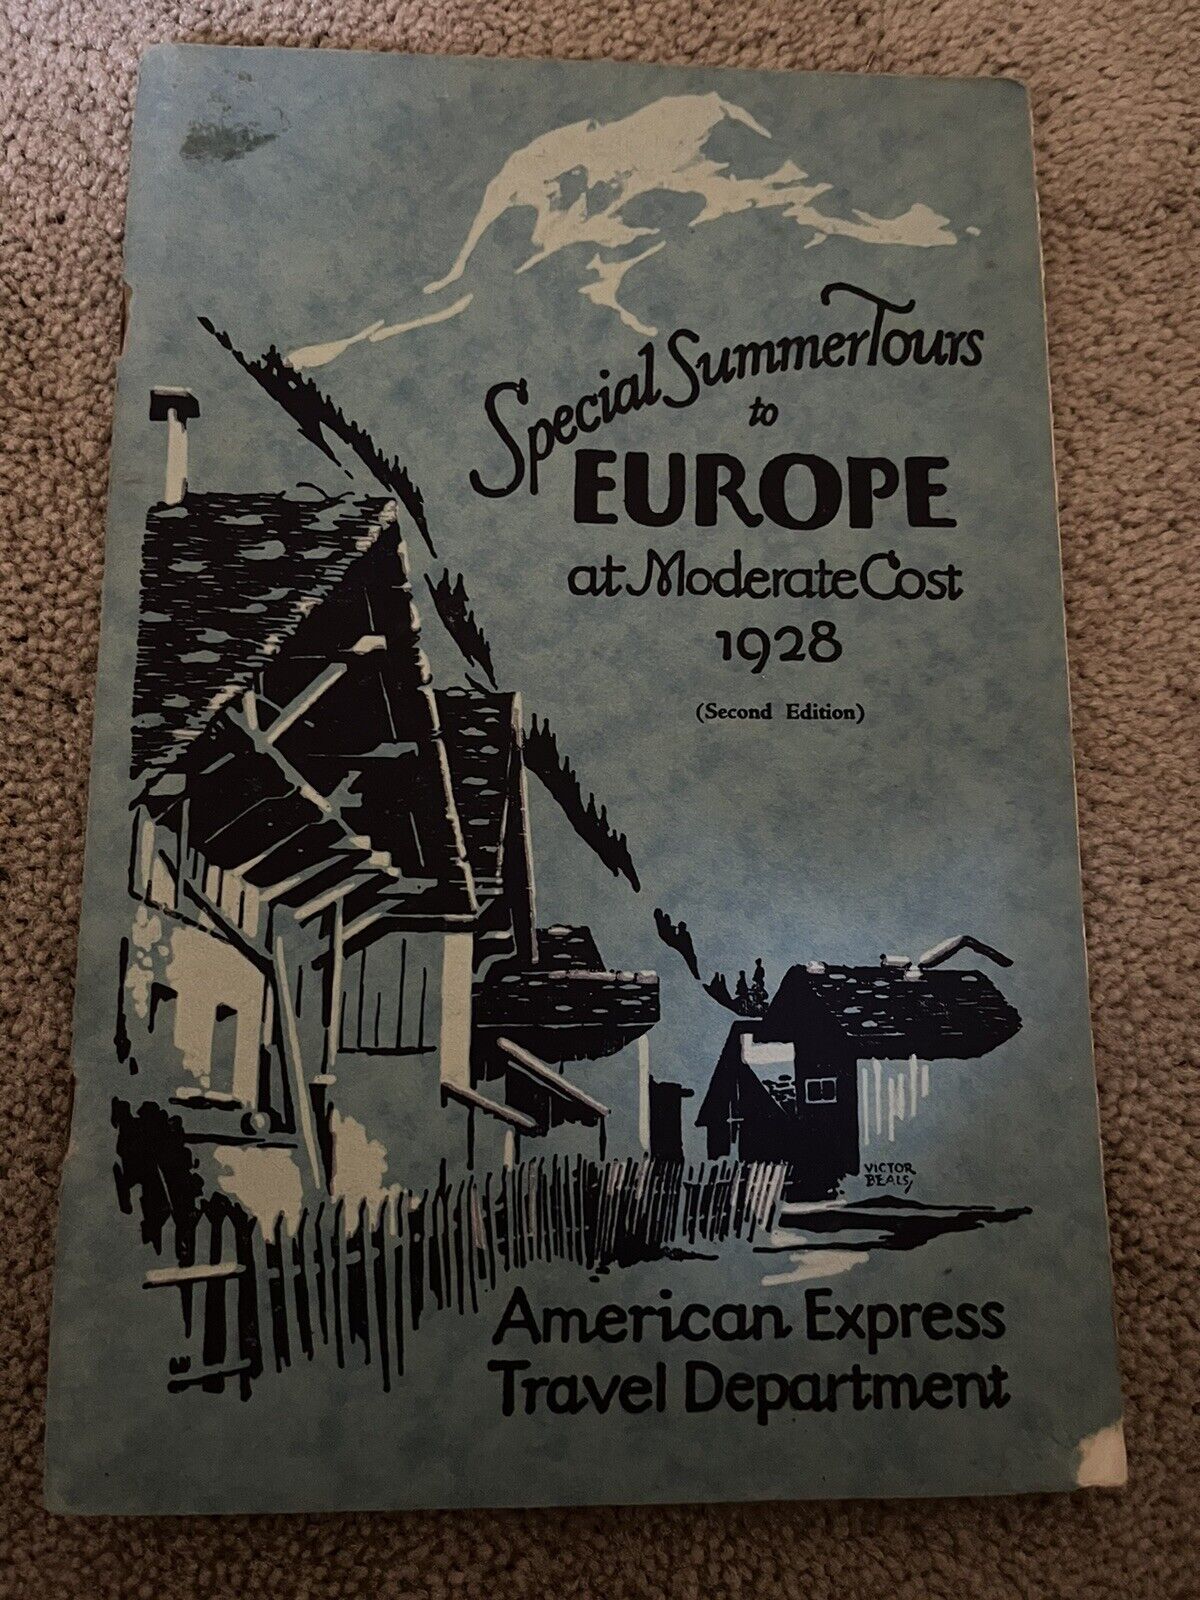 Vintage 1928 Travel Brochure American Express Summer Tours To Europe At Moderate